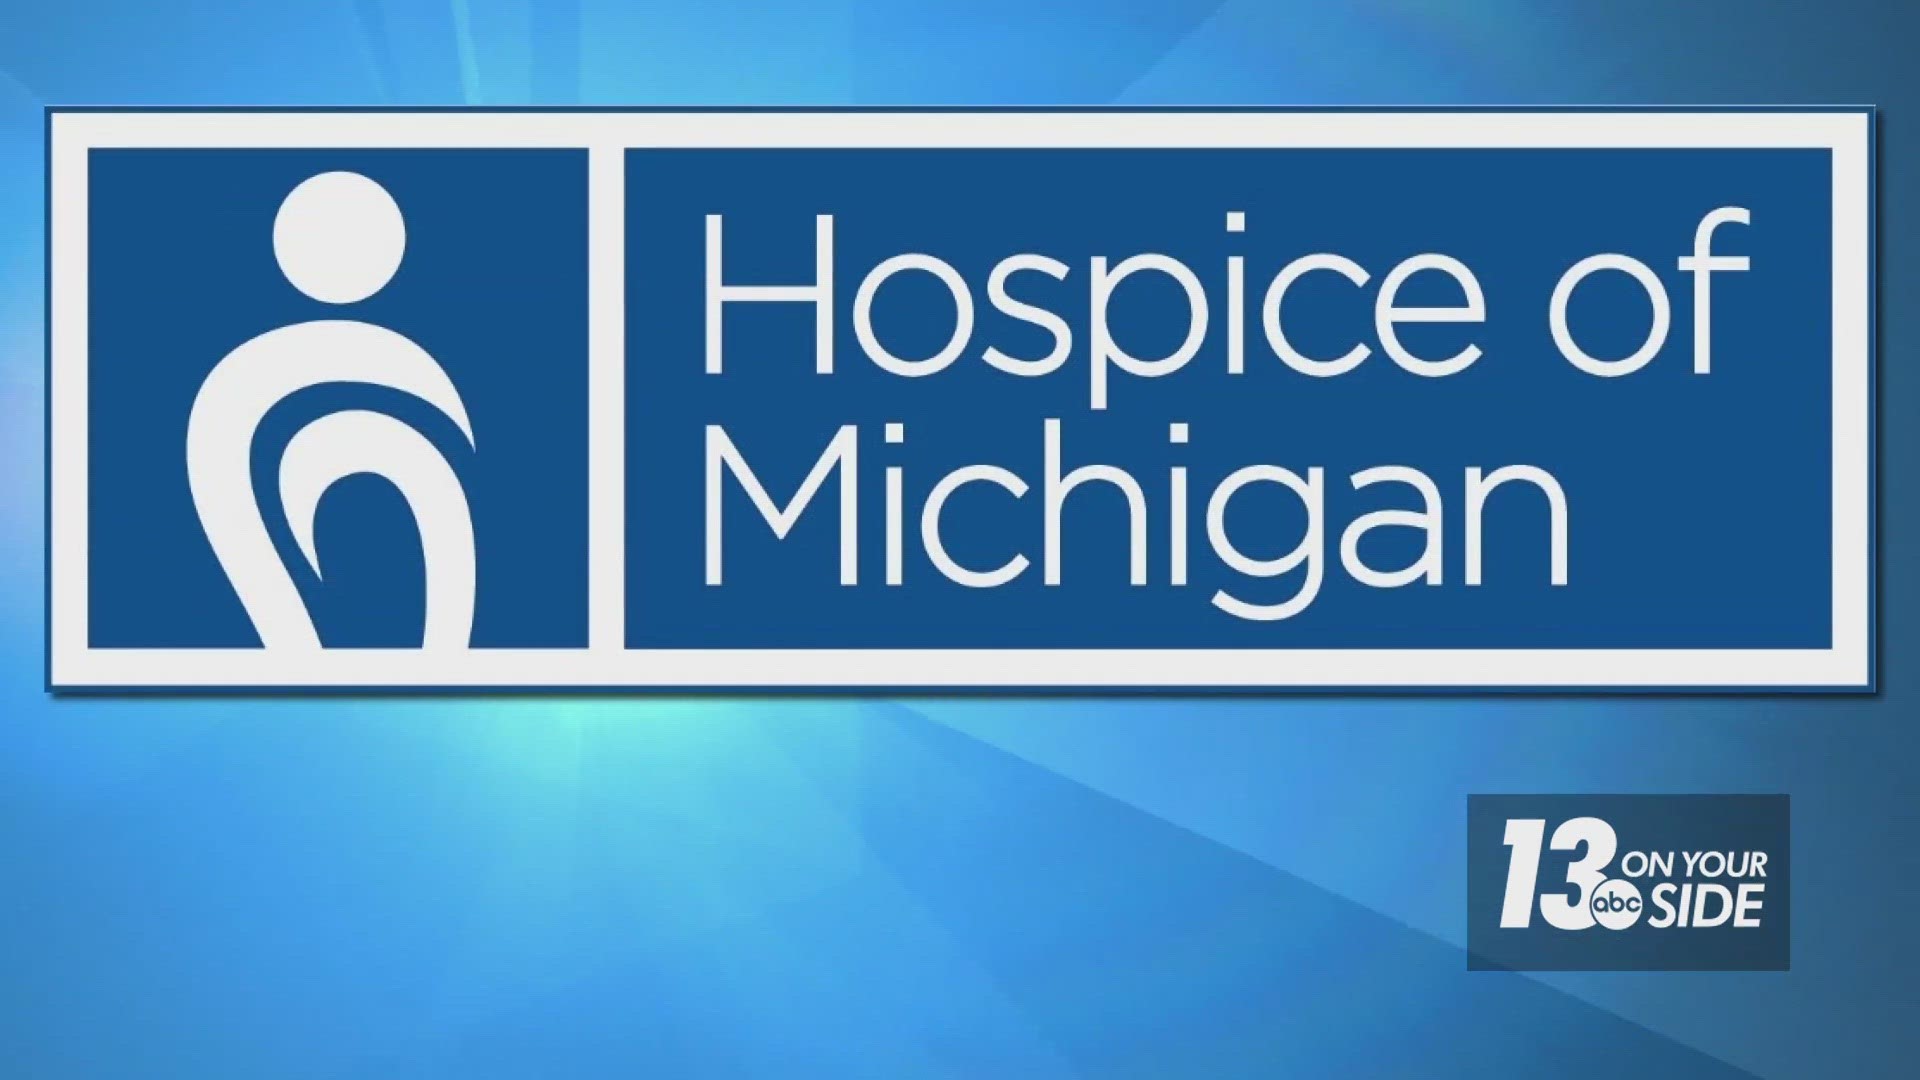 Hospice of Michigan has been living out its mission of providing quality, end-of-life care for all for 45 years now